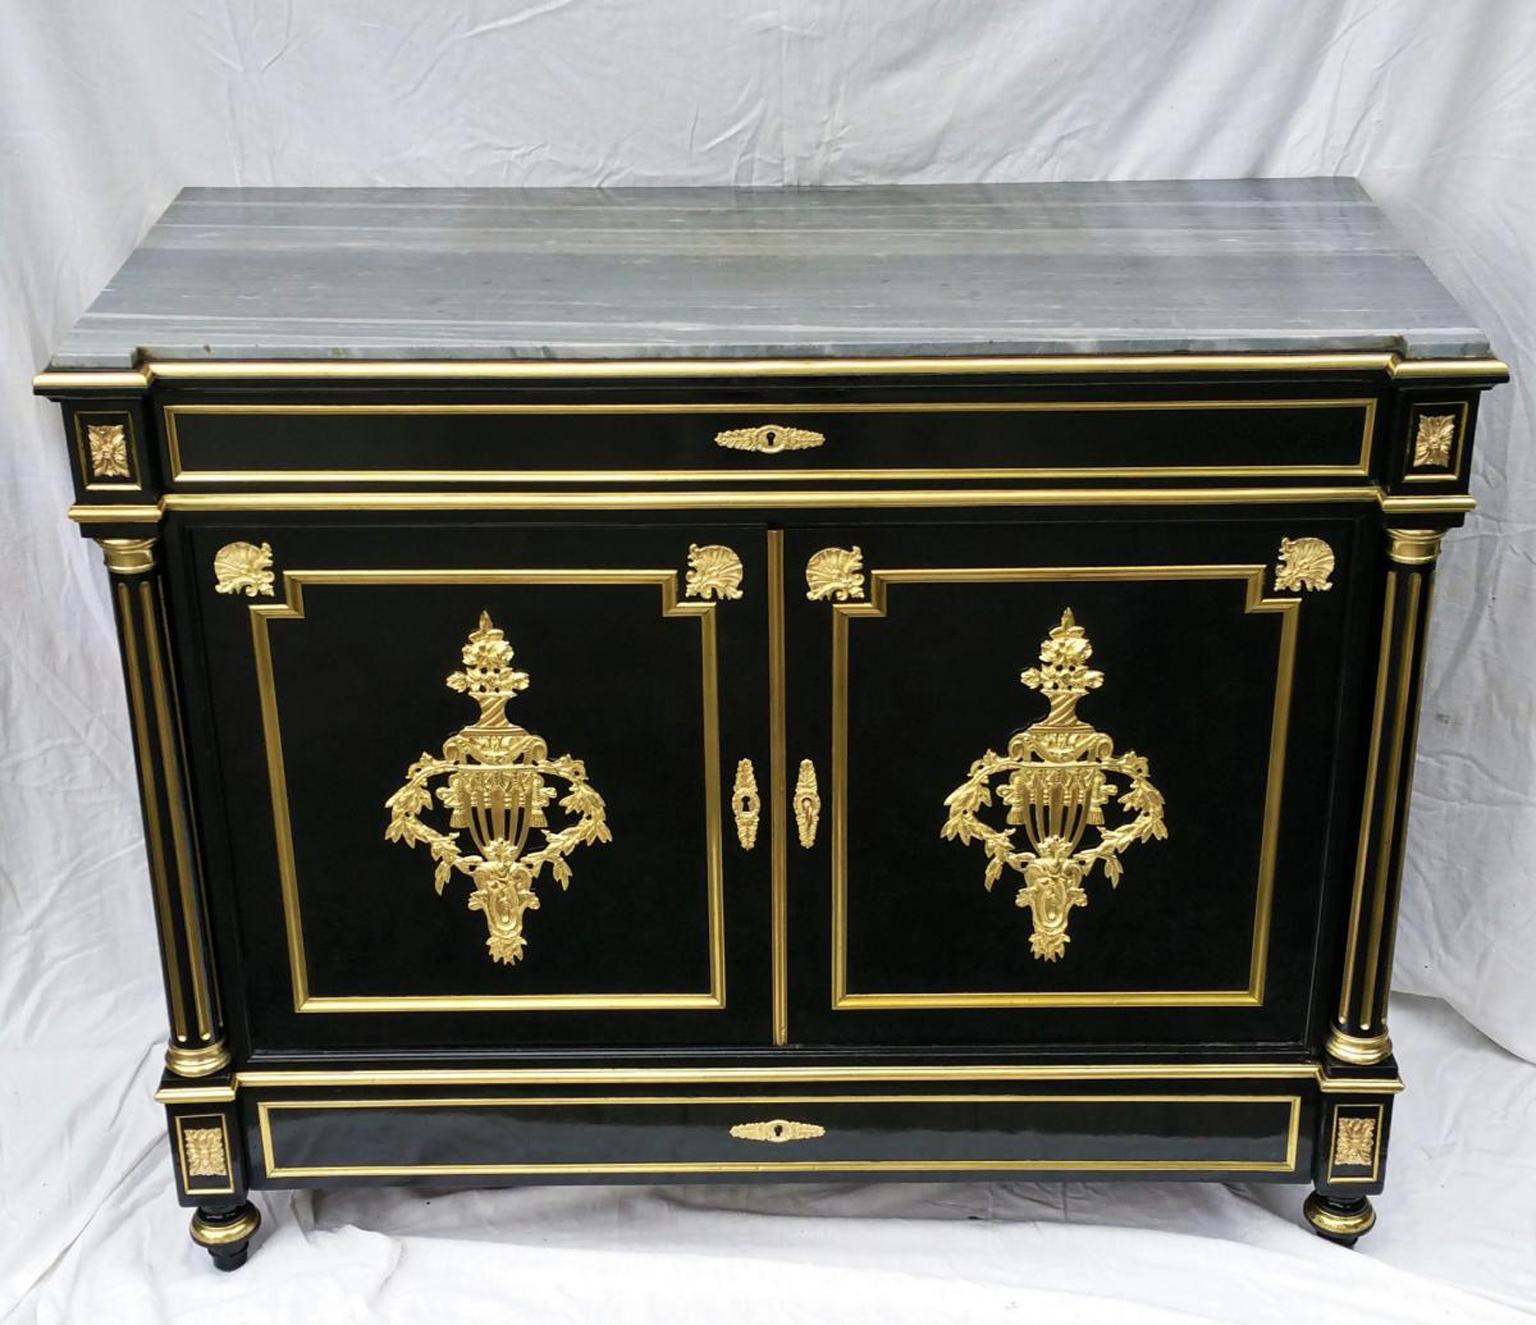 Rare pantalonnière cabinet, with several drawers for pants trousers in blackened fruitwood with Brass inlay in Boulle style and gilt bronze ornamentations, a light grey marble top and detached fluted columns. 

A real bedroom closet a real unique